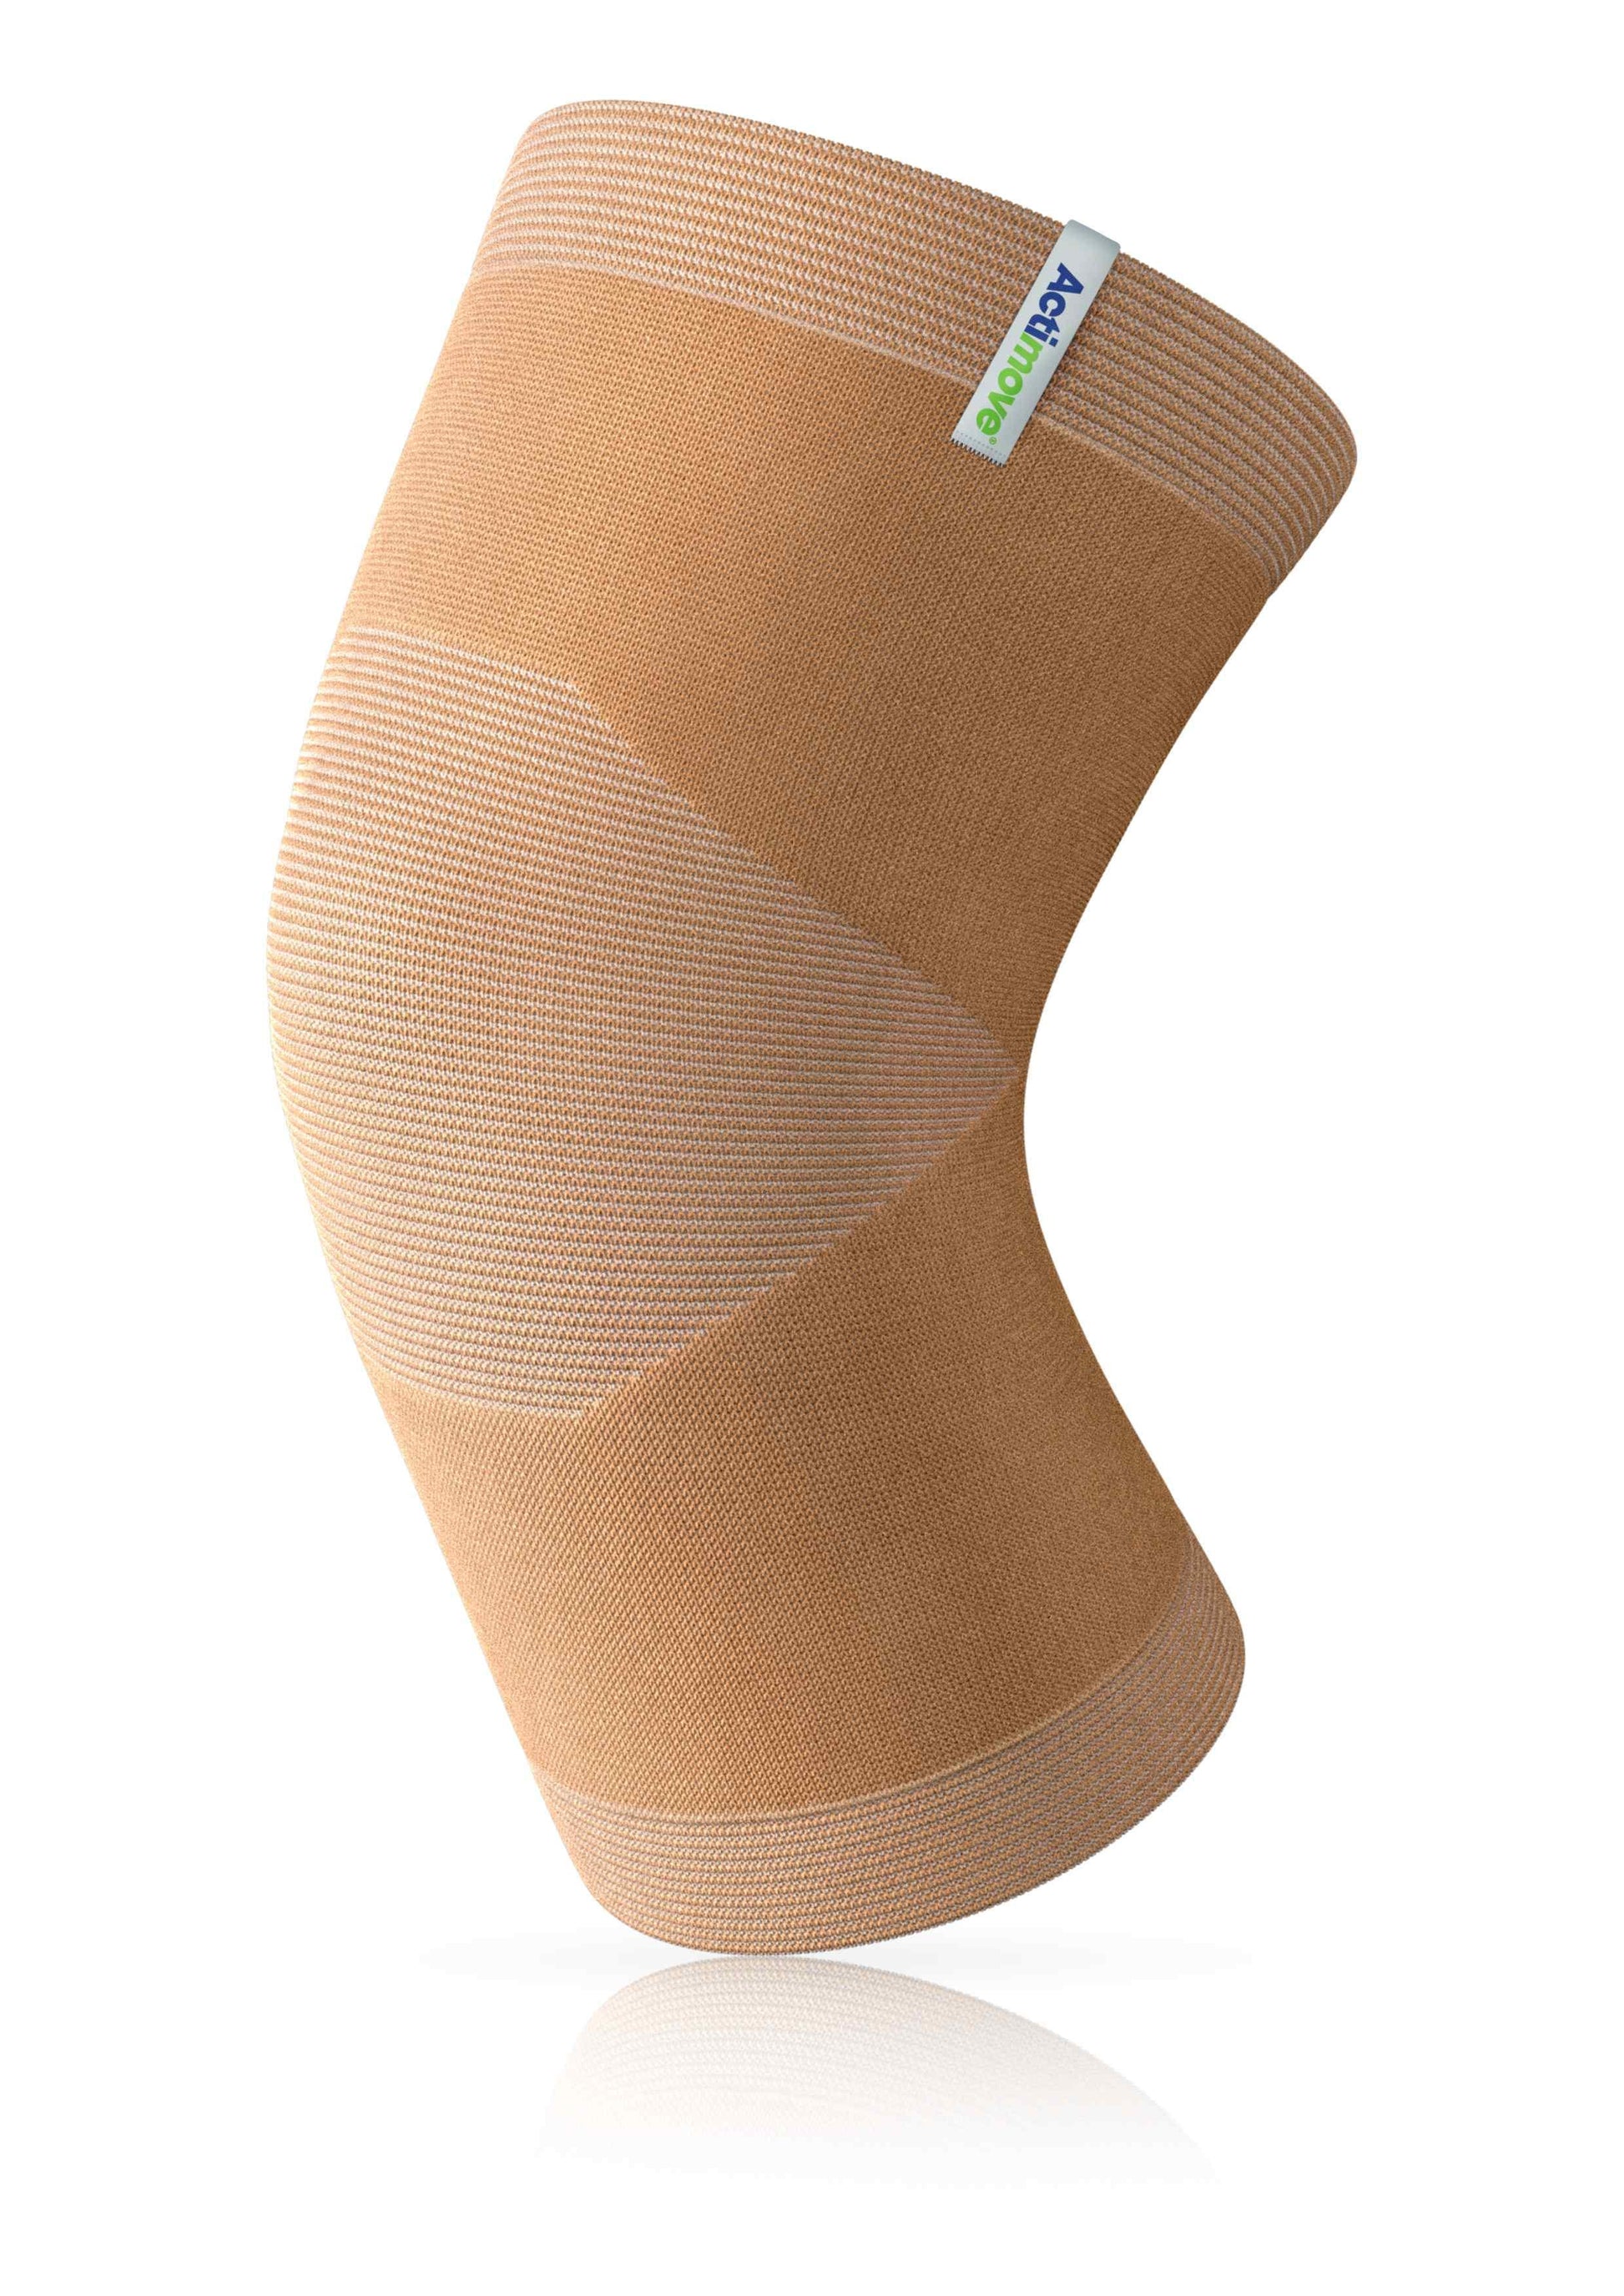 Actimove® Joint Warming Knee Support